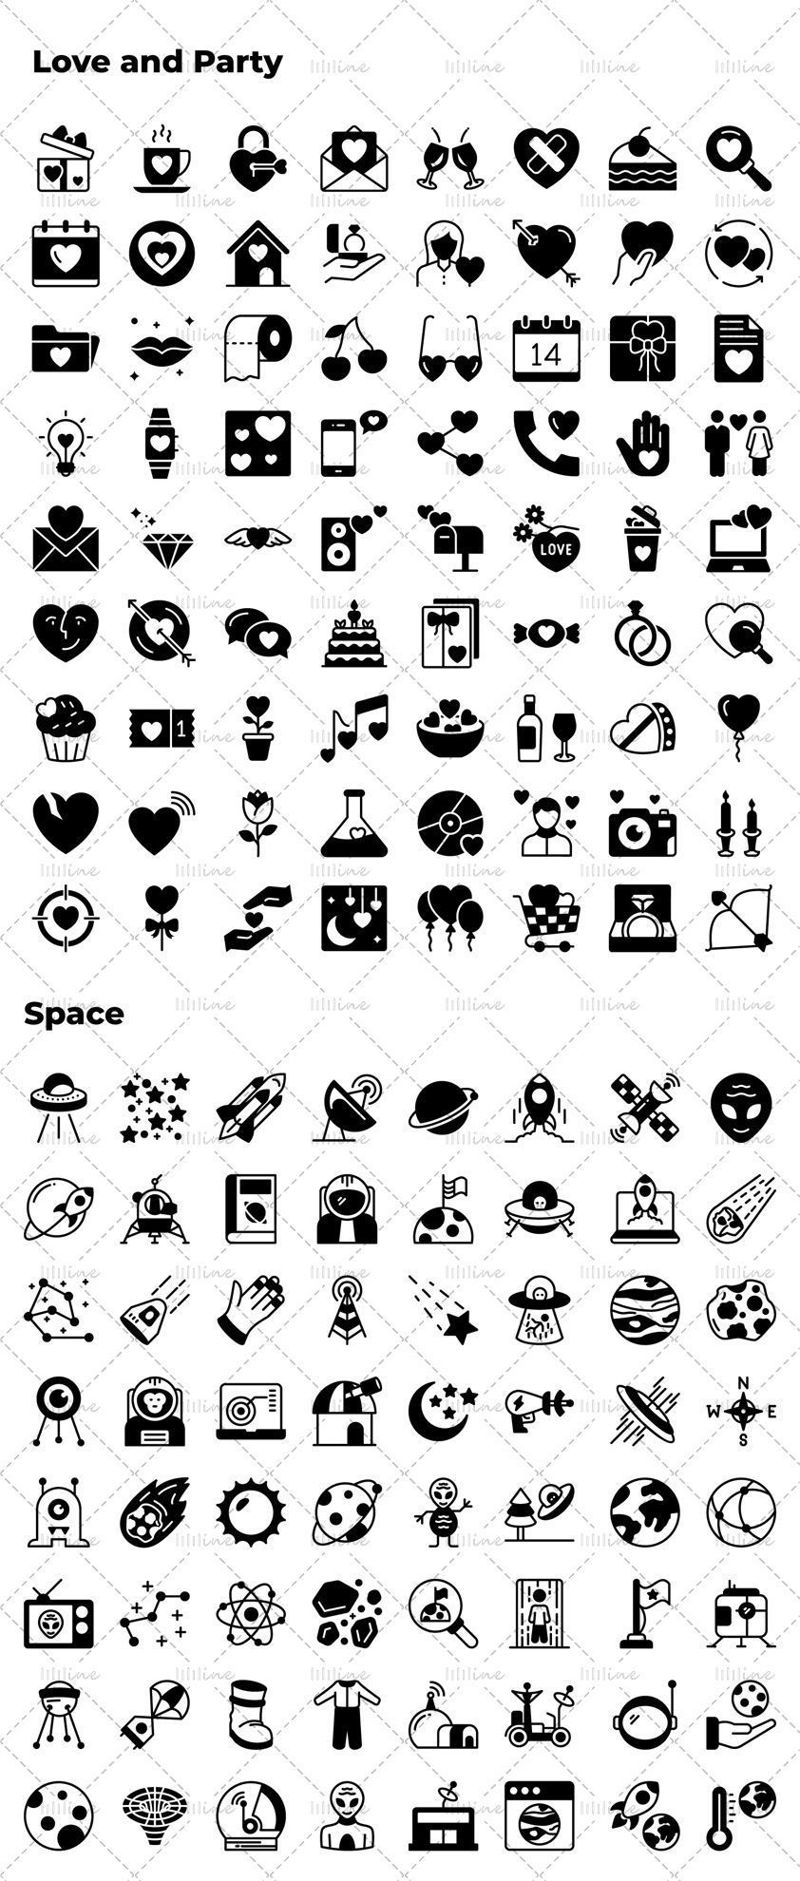 Love party, space vector icon